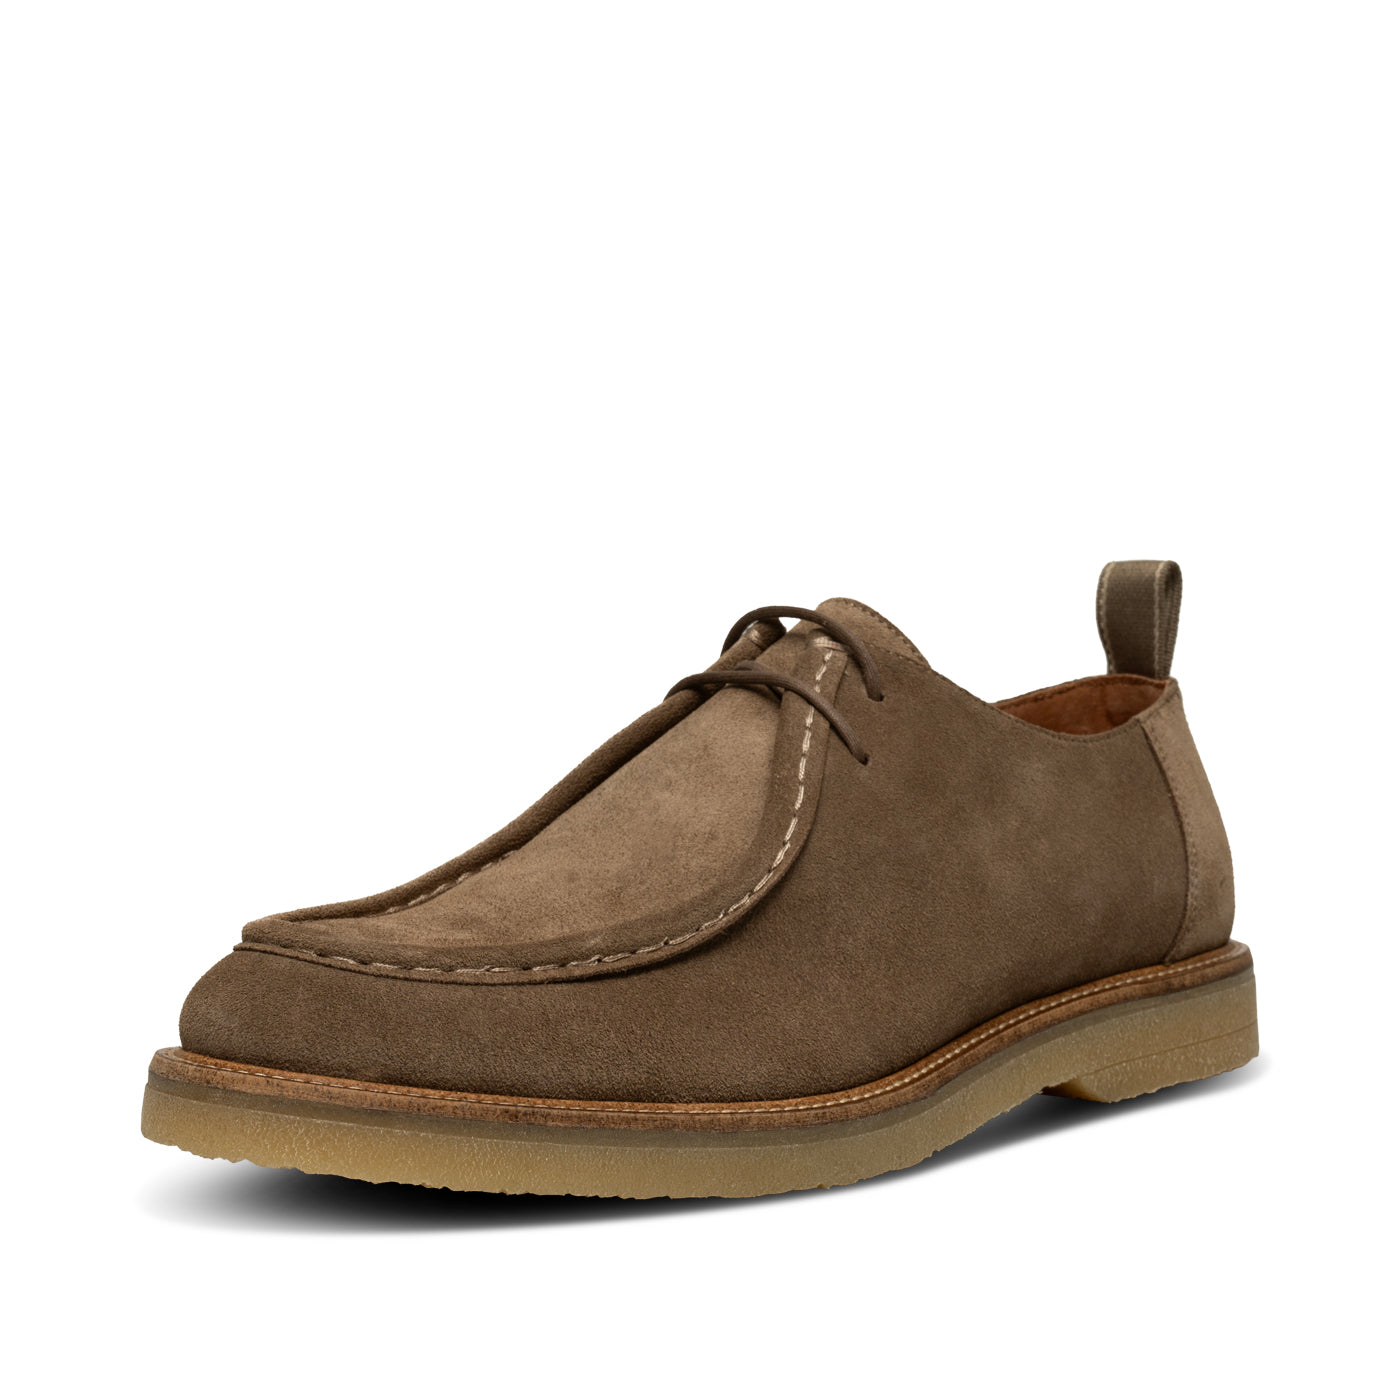 SHOE THE BEAR MENS Kip wallabee suede water repellent Shoes 160 TAUPE